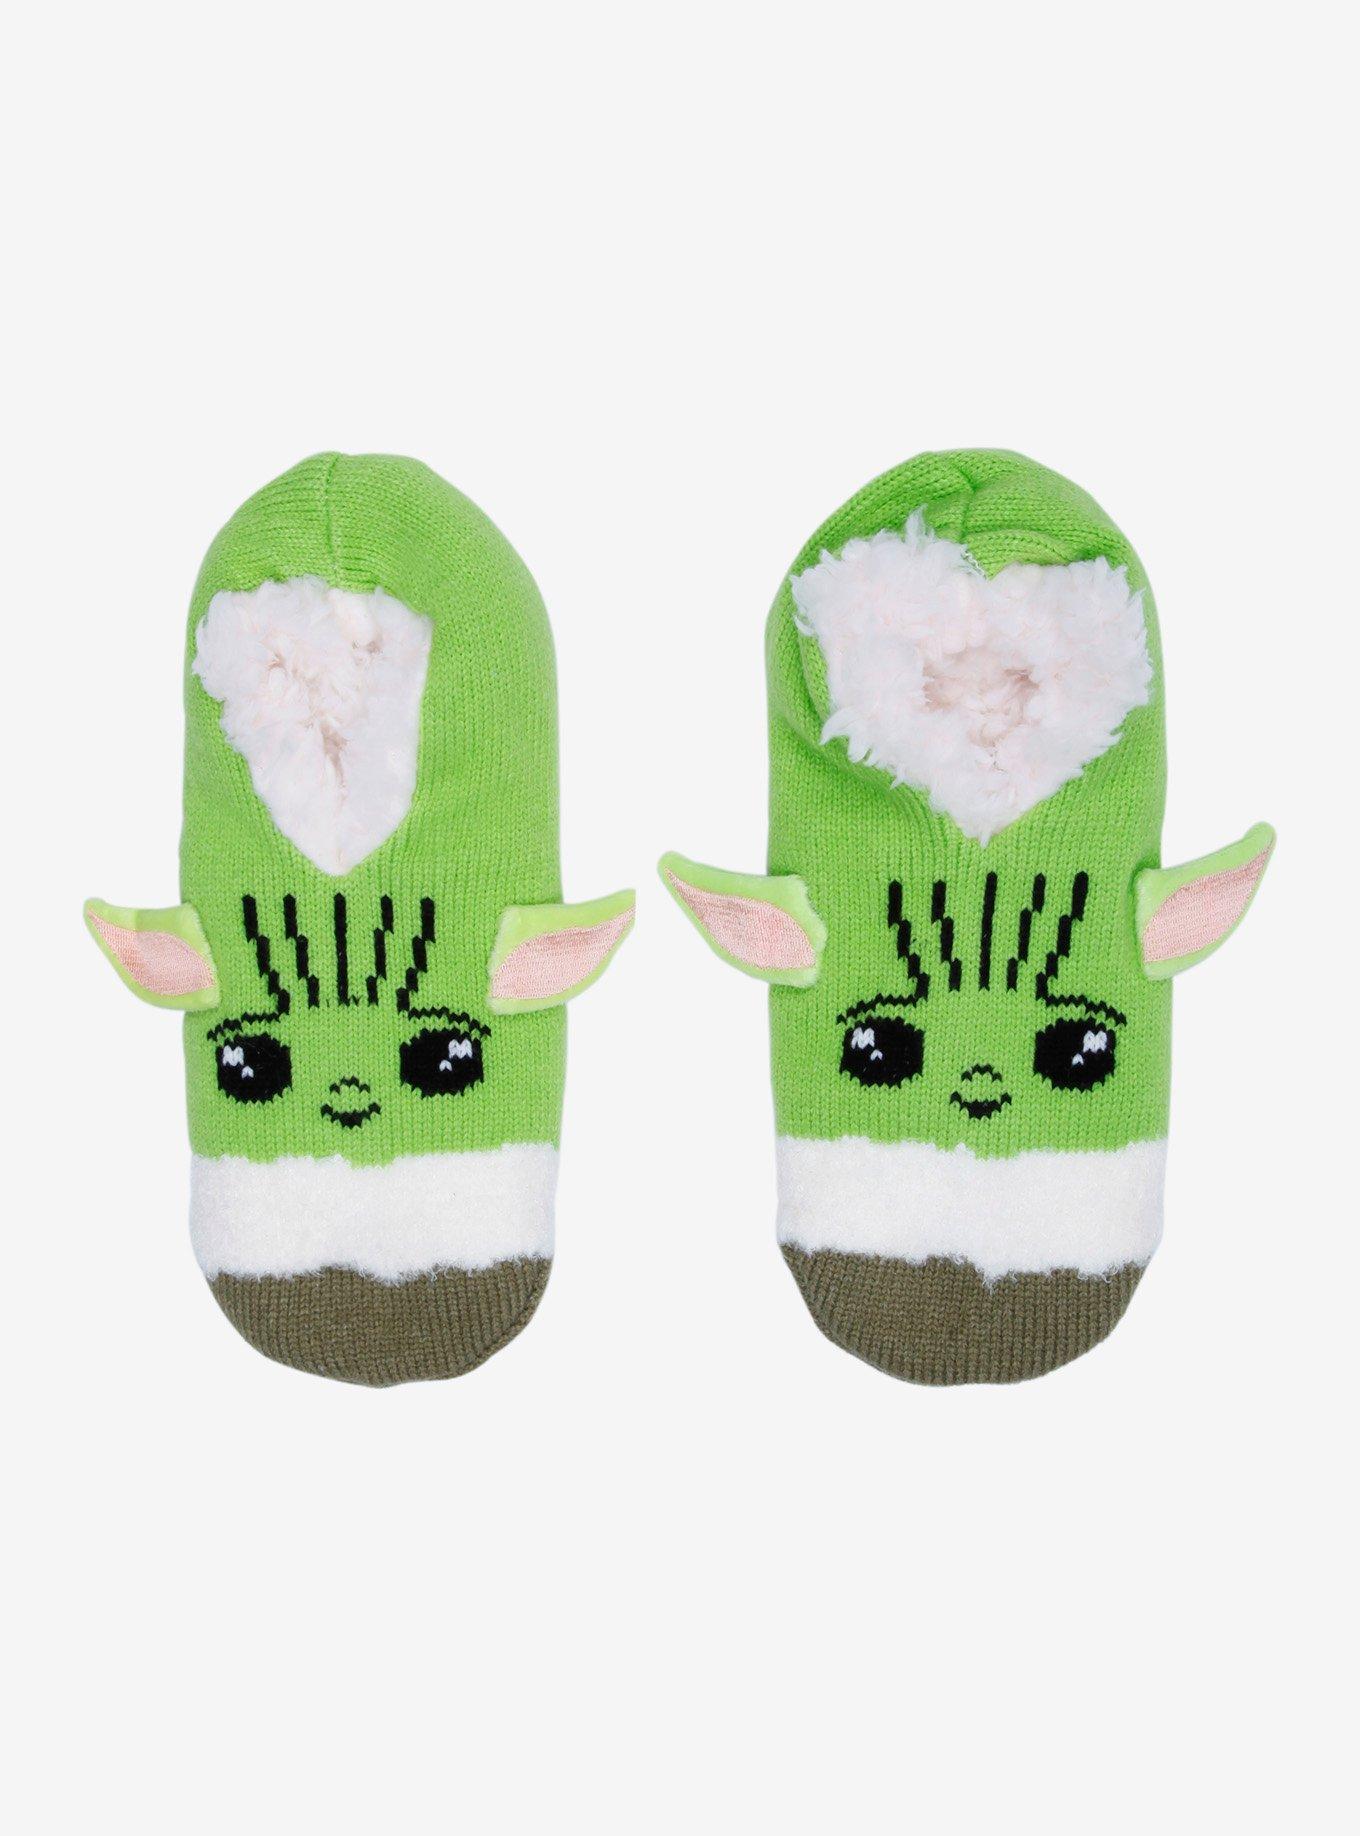 Star Wars The Mandalorian The Child Cozy Slippers, , hi-res